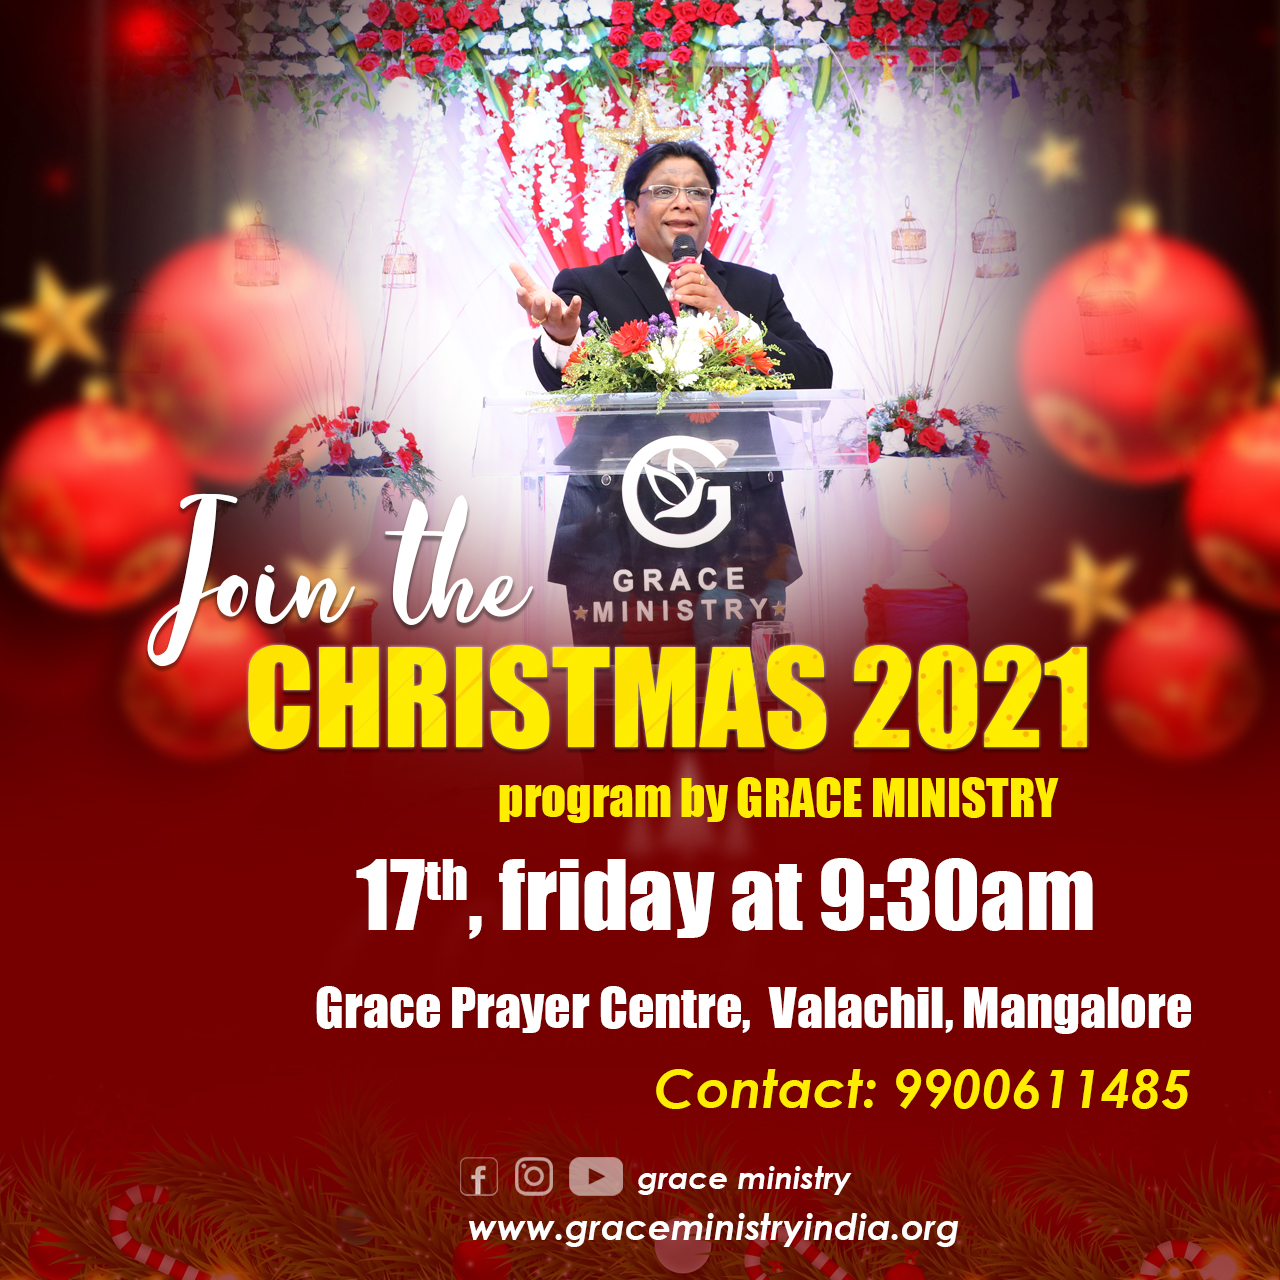 Join the Christmas Program 2021 of Grace Ministry on 17th December, Friday from 9:30 Am - 2:00 Pm at Grace Prayer Centre, Valachil in Mangalore. Together, let’s celebrate the message of Christmas. 